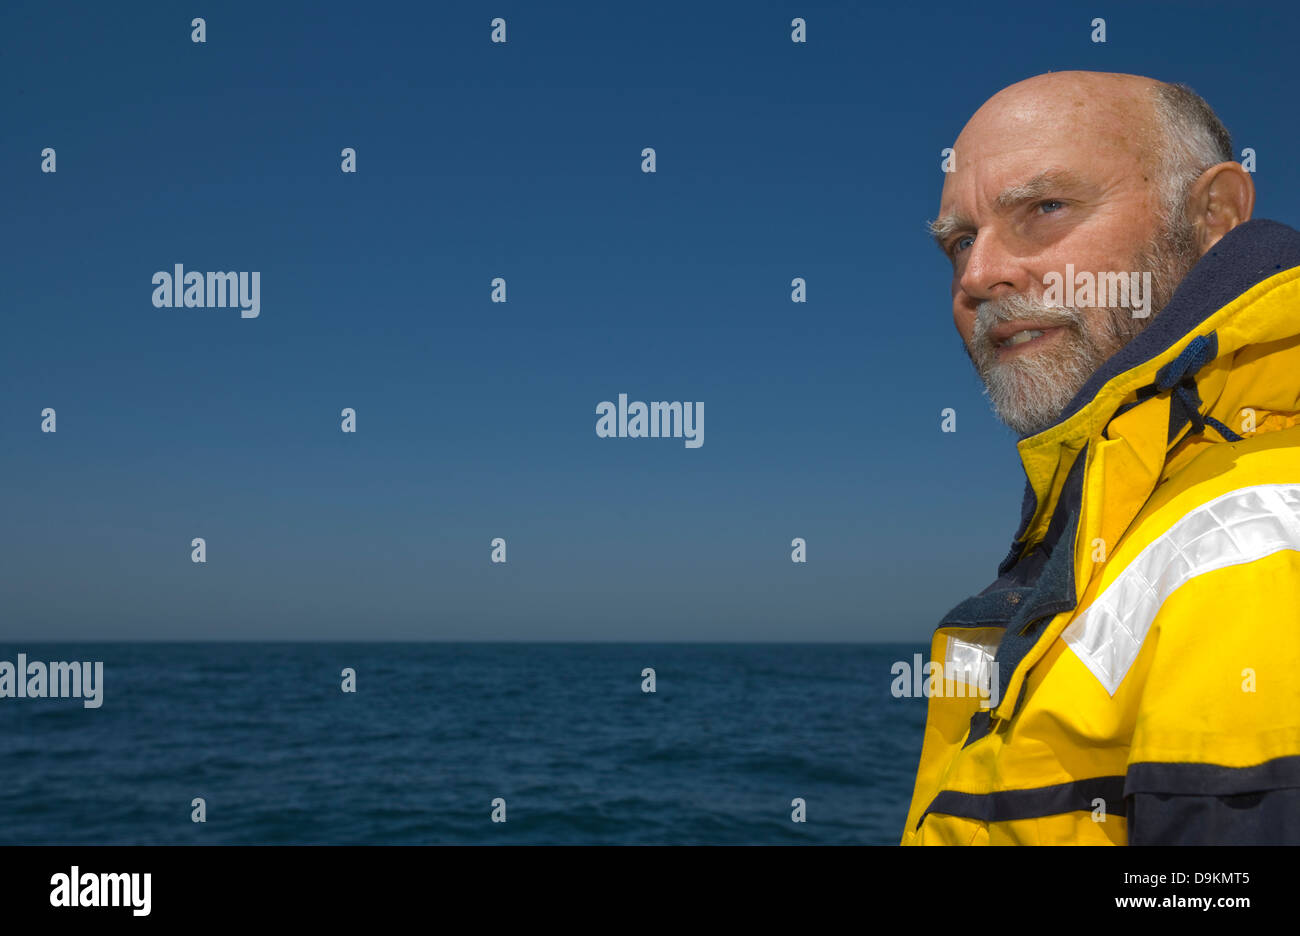 SAN DIEGO, CA – APRIL 19: Dr. Craig Venter on his Sail Boat in San Diego, California, U.S. on April 19, 2007. Stock Photo